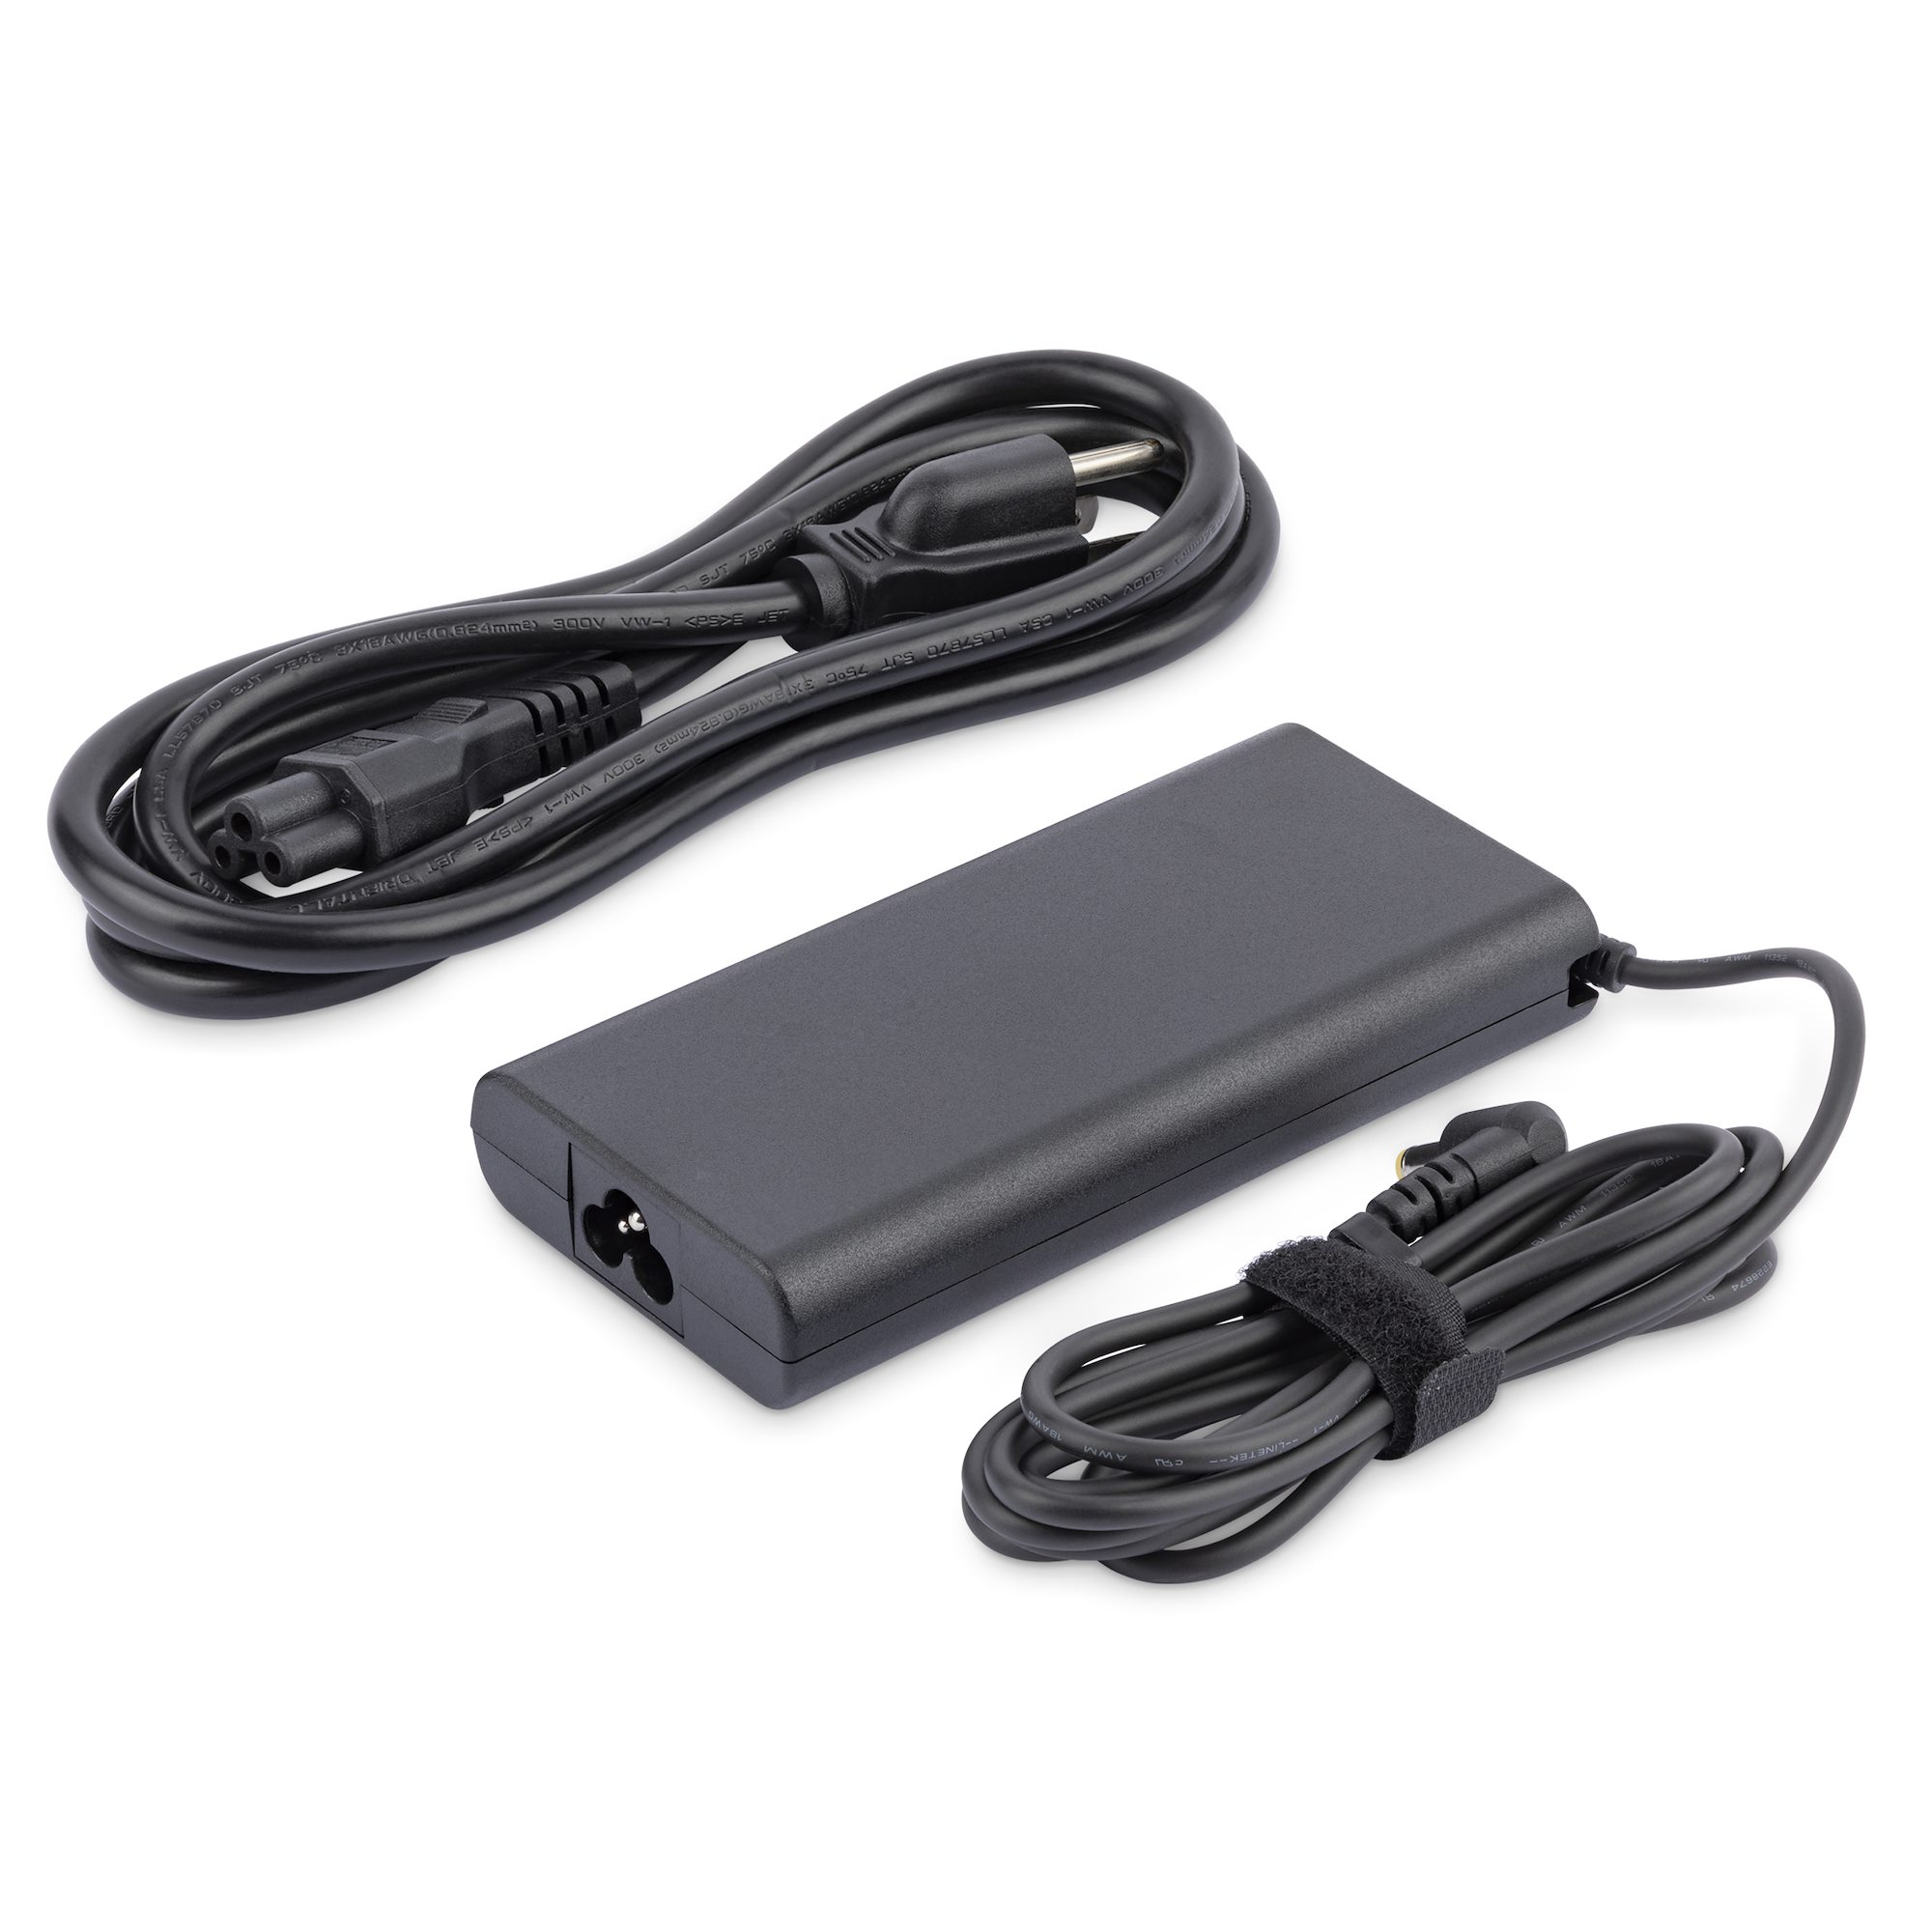 Docking Station Power Adapter - 150W - Power Adapters